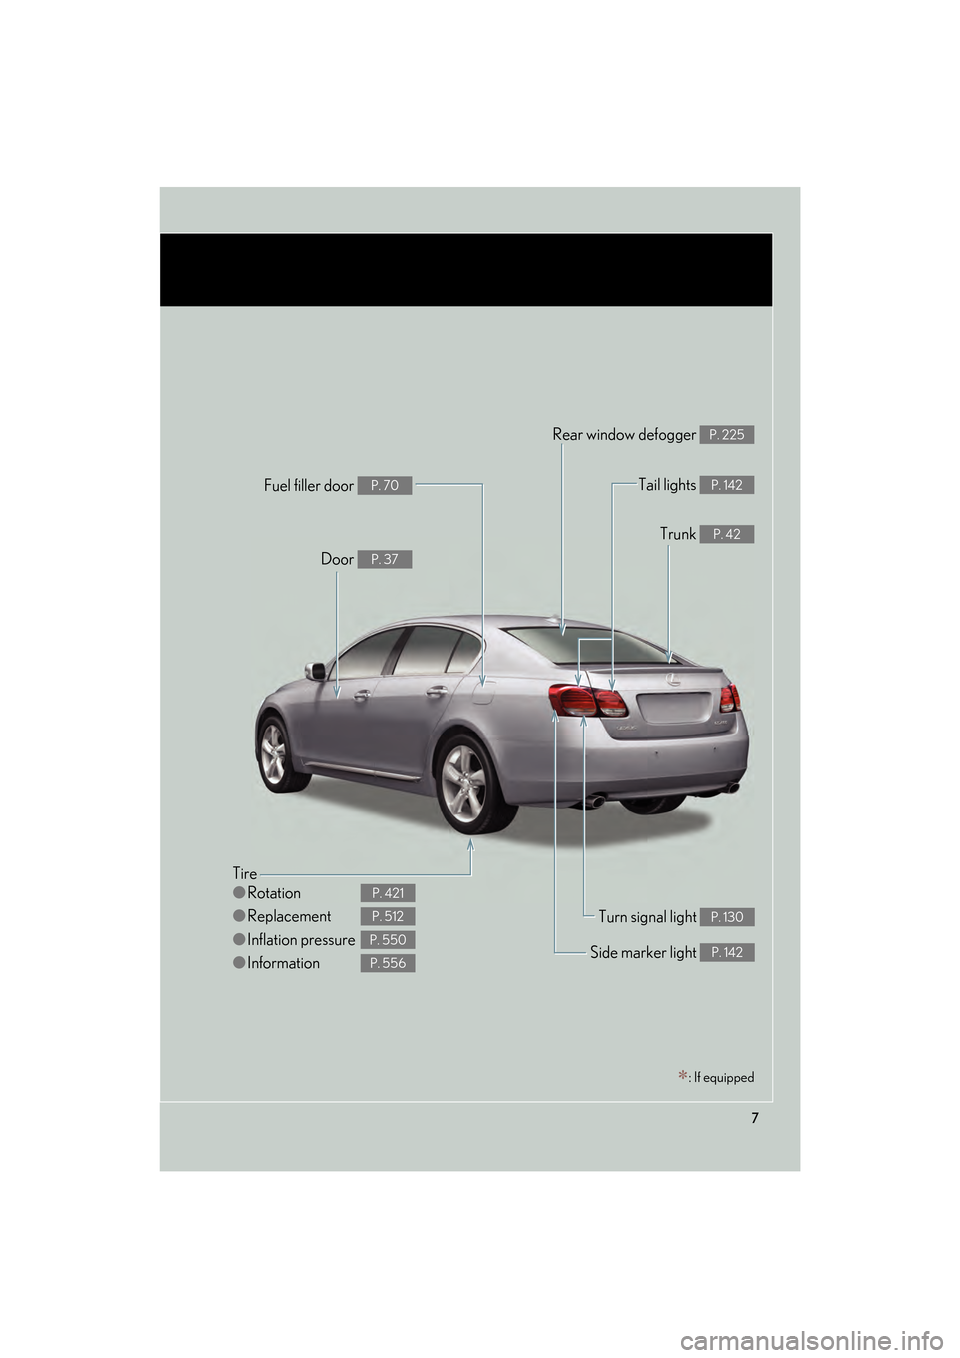 Lexus GS350 2008  Owners Manual 7
GS_G_U
June 19, 2008 12:54 pm
Tire
●Rotation
● Replacement
● Inflation pressure
● Information
P. 421
P. 512
P. 550
P. 556
Tail lights P. 142
Side marker light P. 142
Trunk P. 42
Rear window 